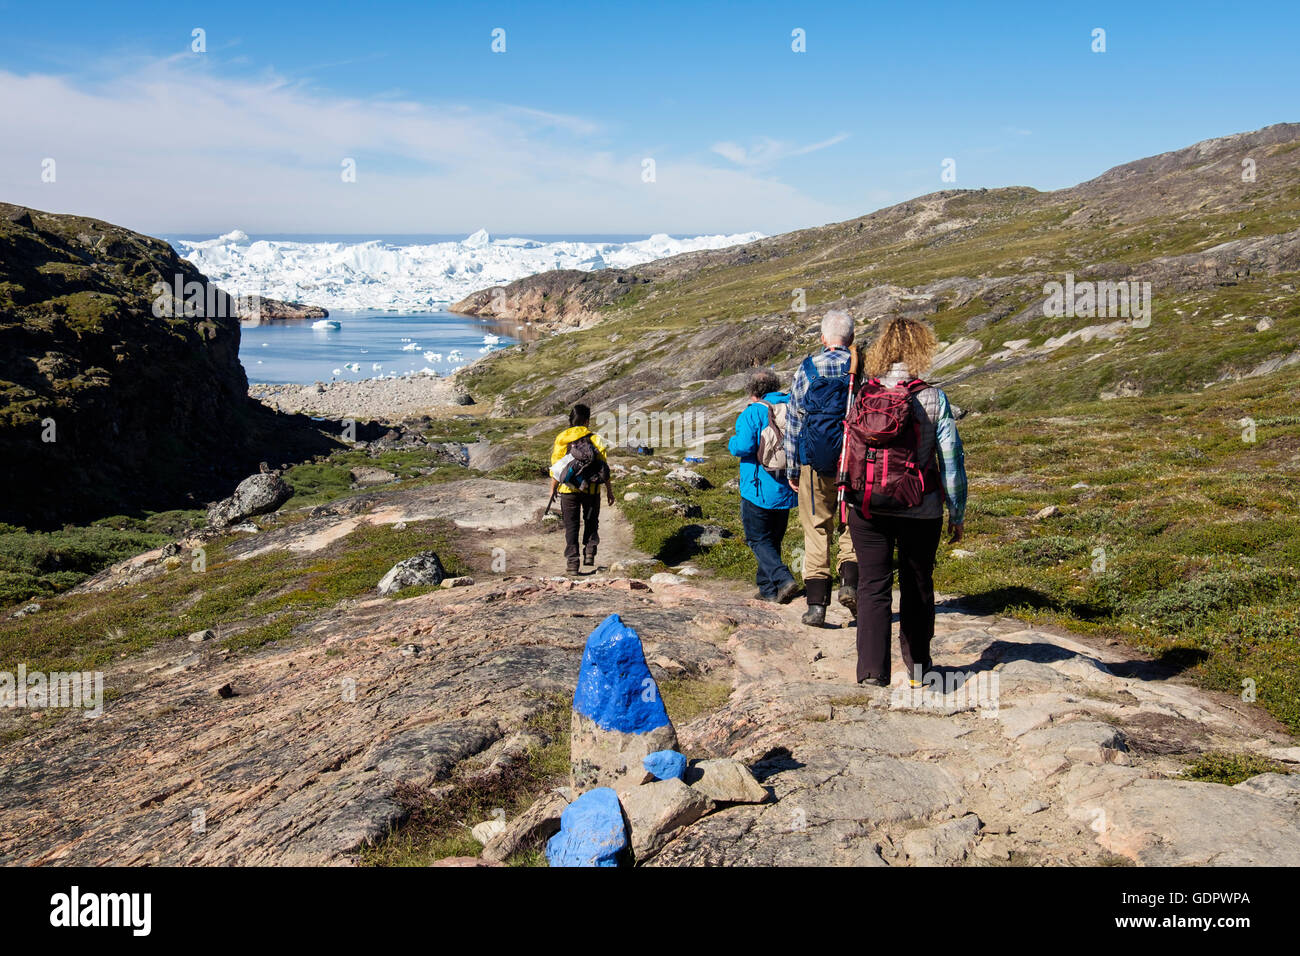 Hikers hiking on blue trail hike to Holms Bakke by Ilulissat Icefjord with icebergs in fjord in summer. Ilulissat West Greenland Stock Photo